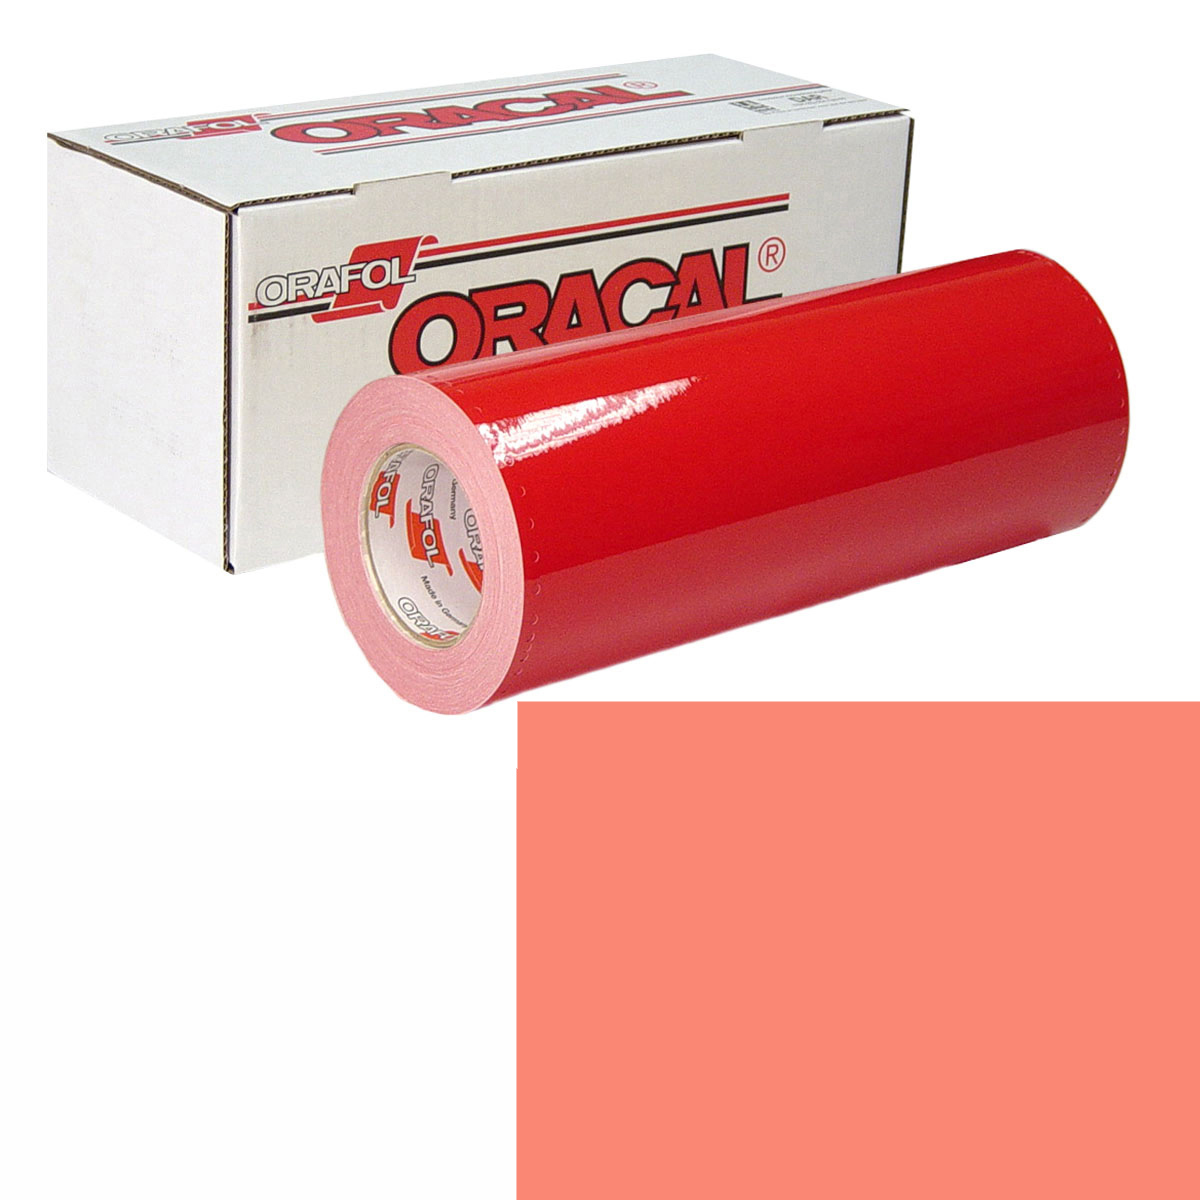 ORACAL 951 15in X 50yd 341 Coral